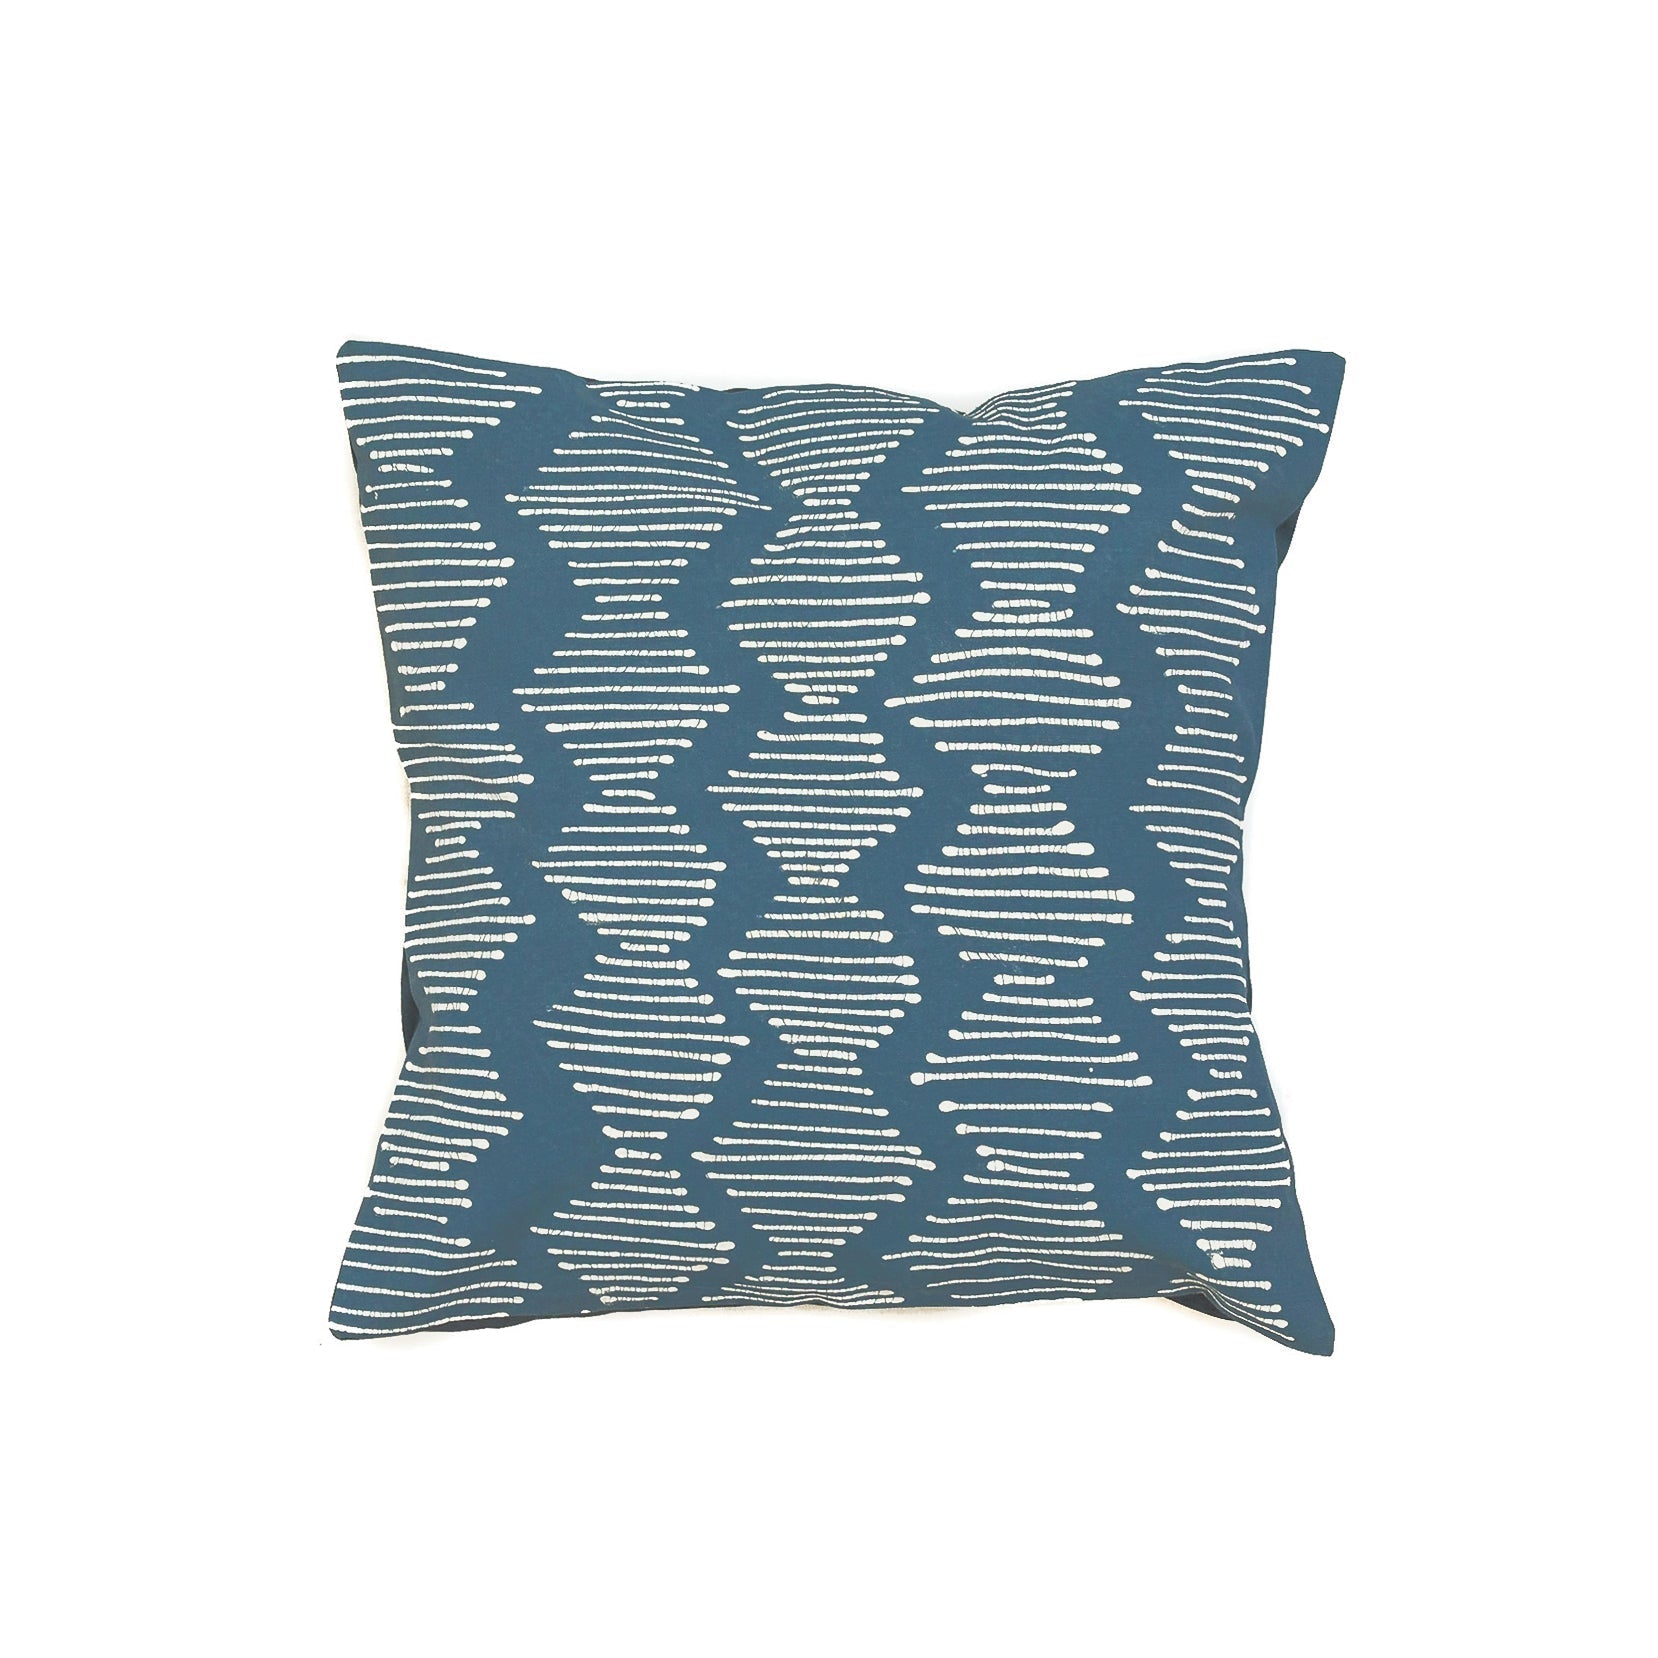 Tribal Cloth Indigo Line Wave Cushion Cover - Handmade with 100% cotton and chic patterns.